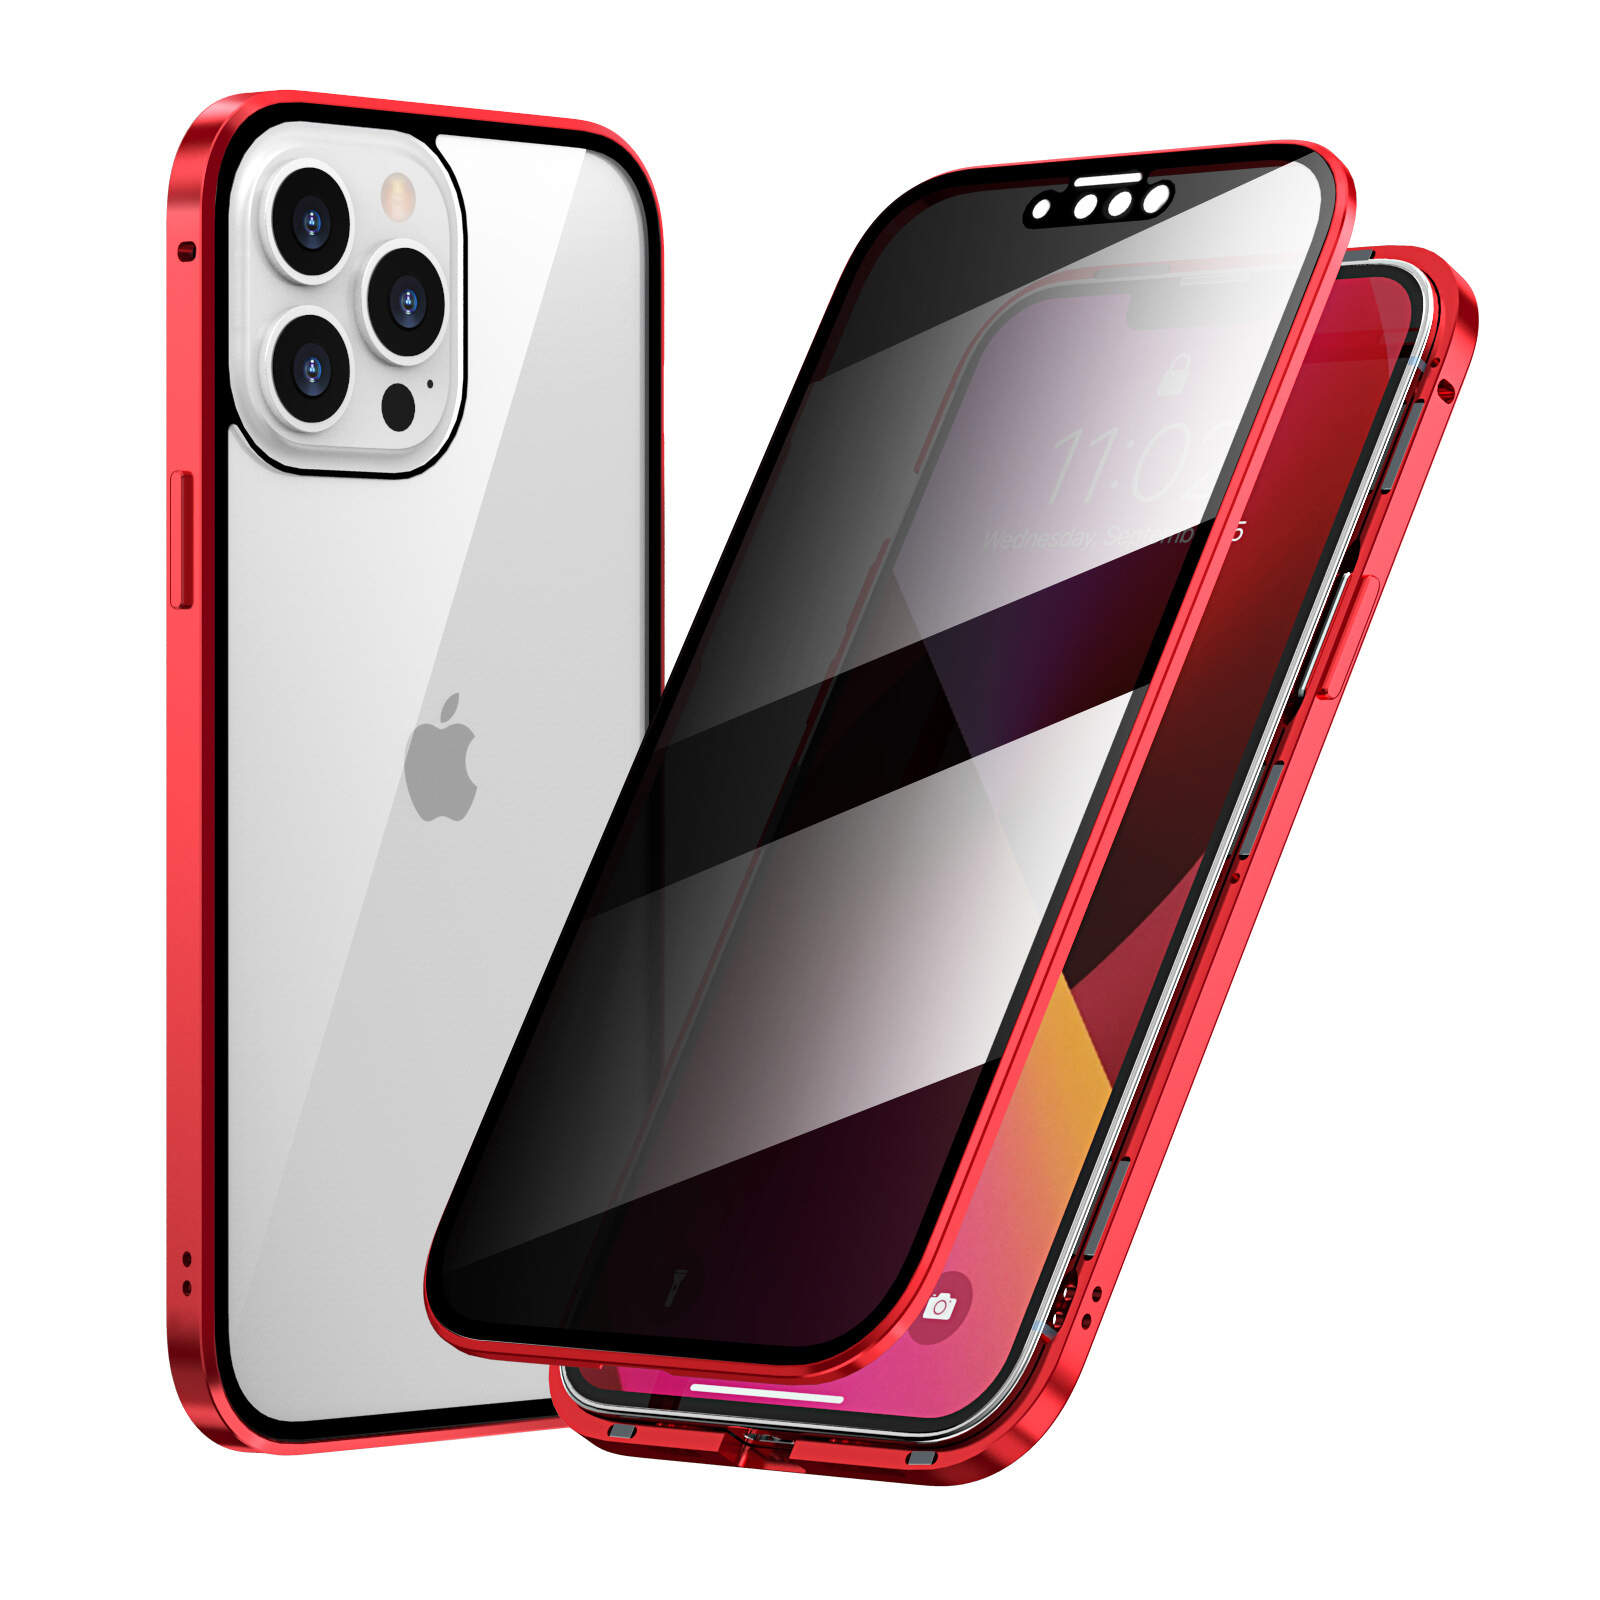 Double-Sided Ultimat privacy case for iPhone